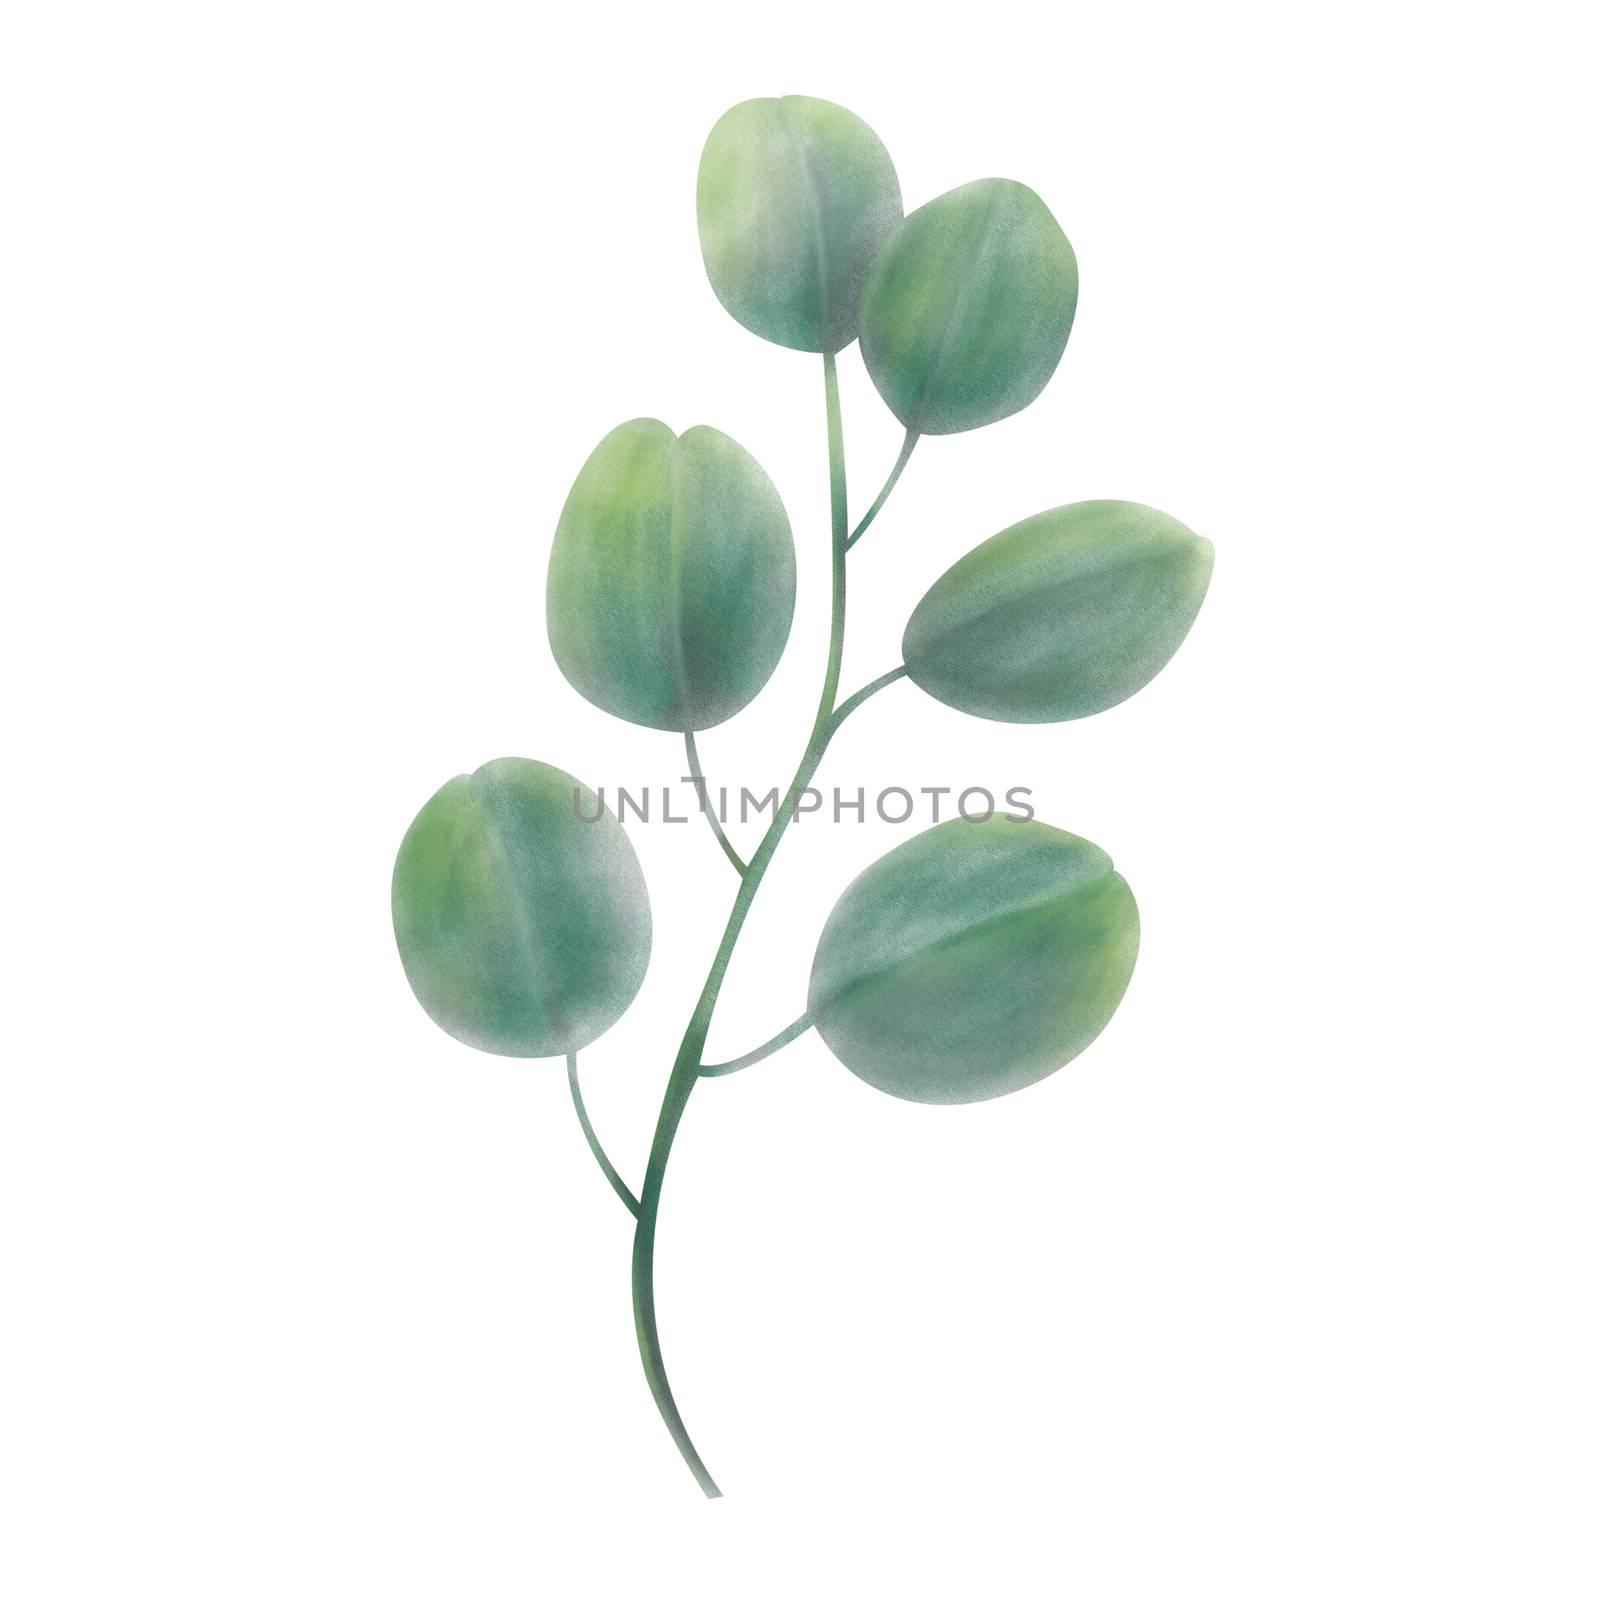 Eucalyptus leaves and branches watercolor digital illustration o by pt.pongsak@gmail.com